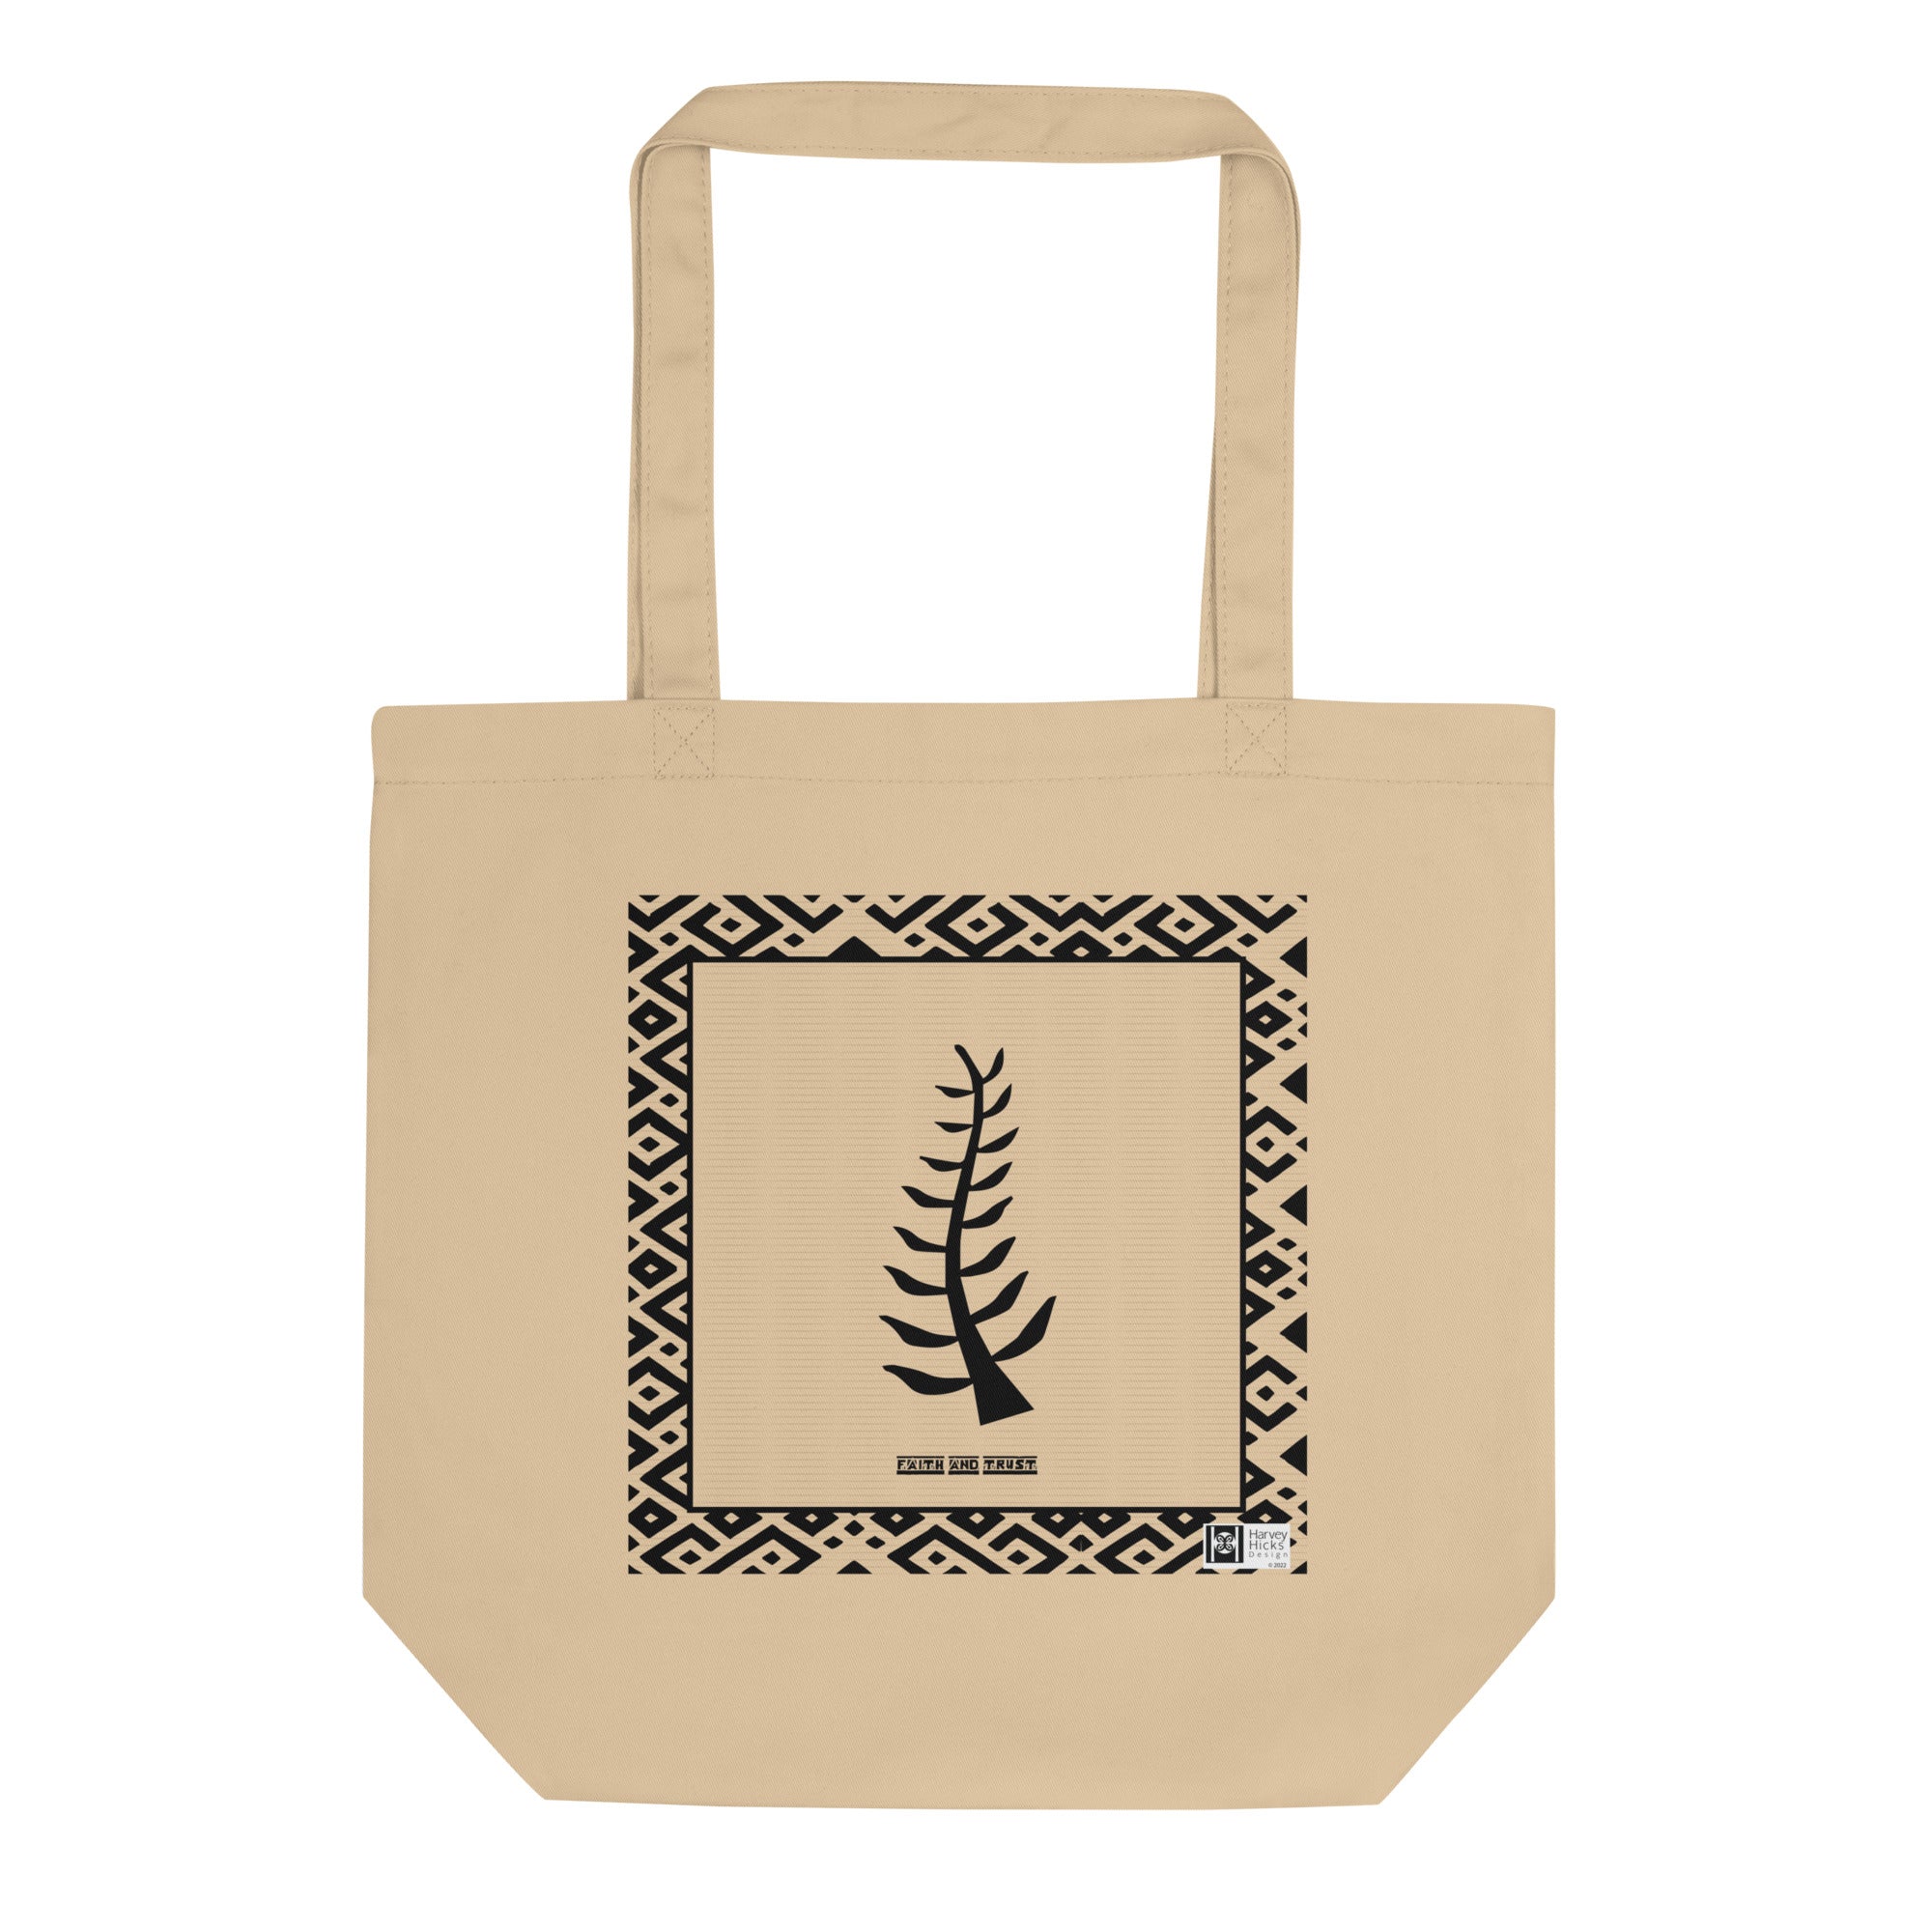 100% cotton Eco Tote Bag, featuring the Adinkra symbol for faith and trust